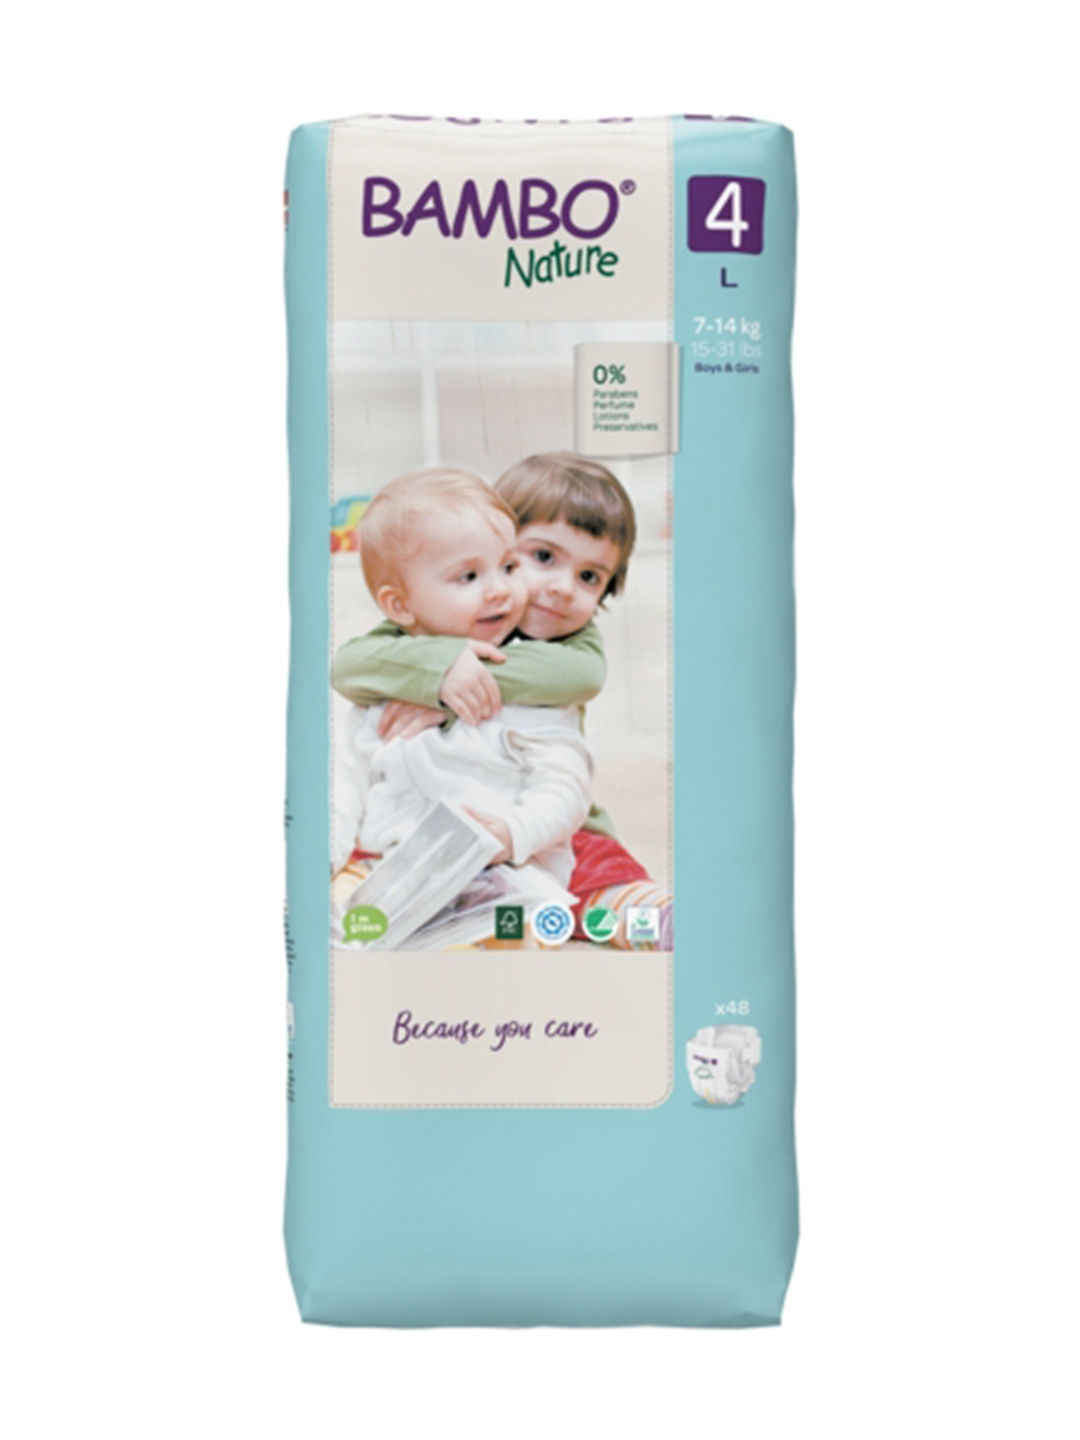 Bambo Nature Premium Baby Diapers - Large Size, 48 Count, For Toddler Baby